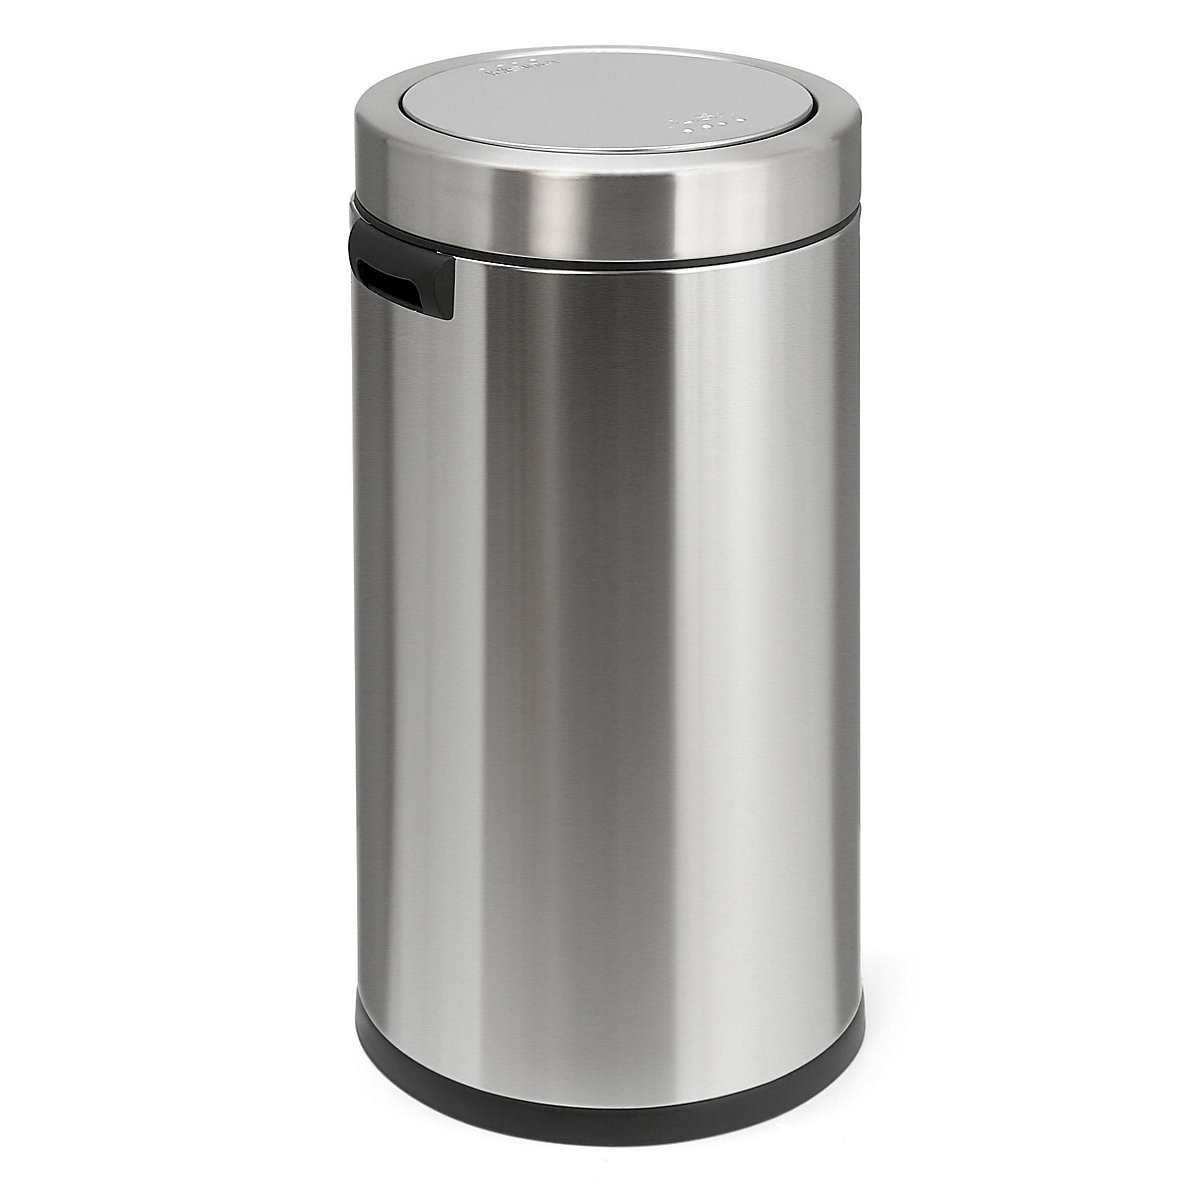 Waste collector 55 l, stainless steel